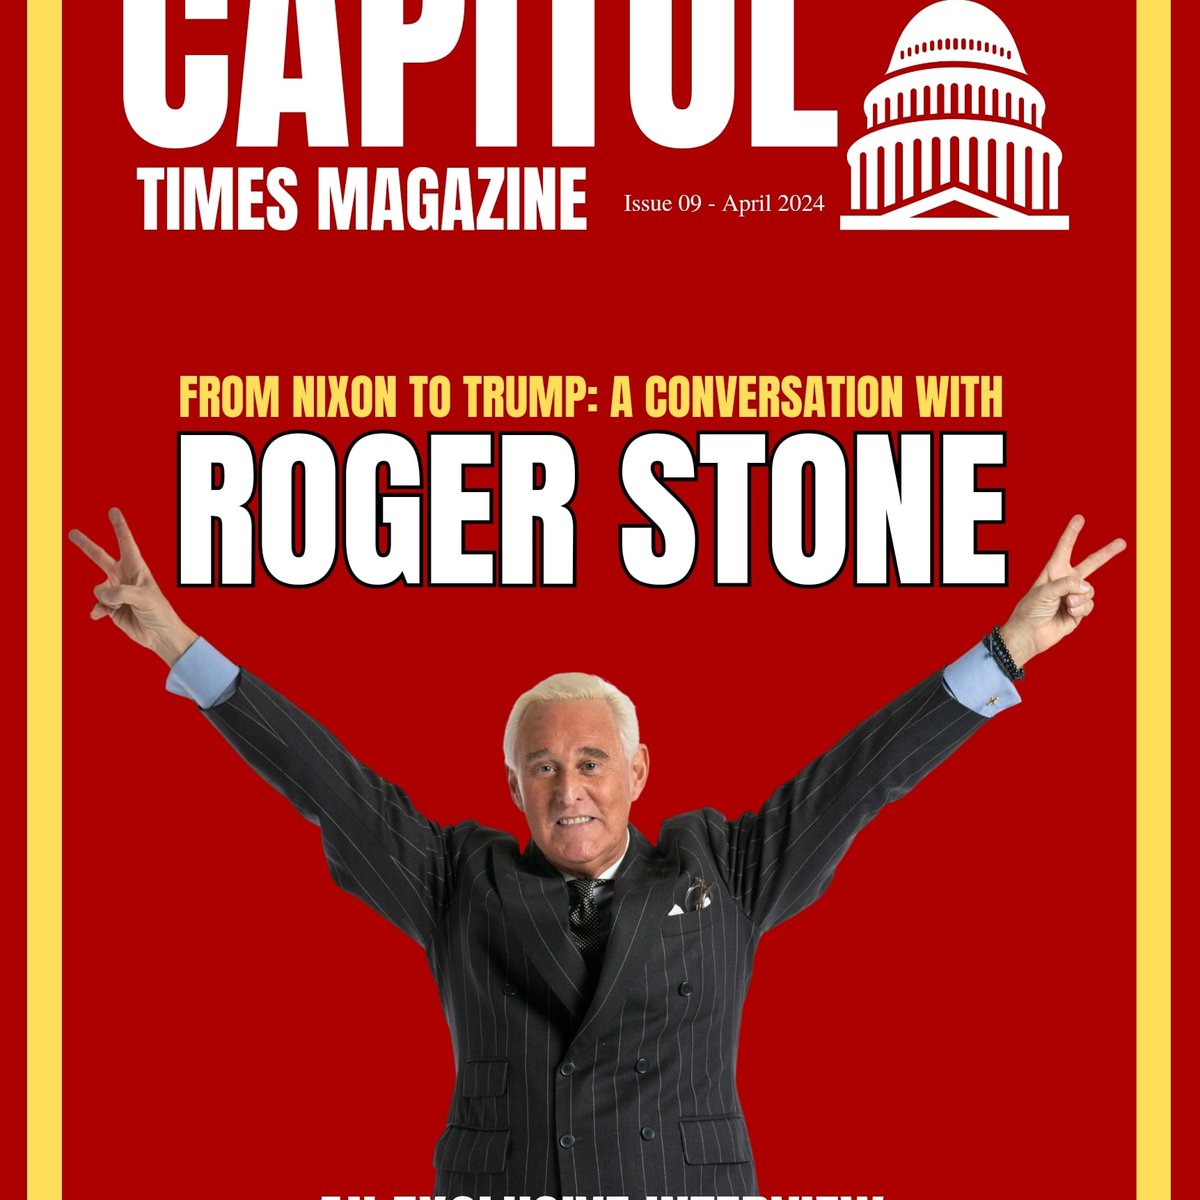 Available at capitoltimesmedia.com